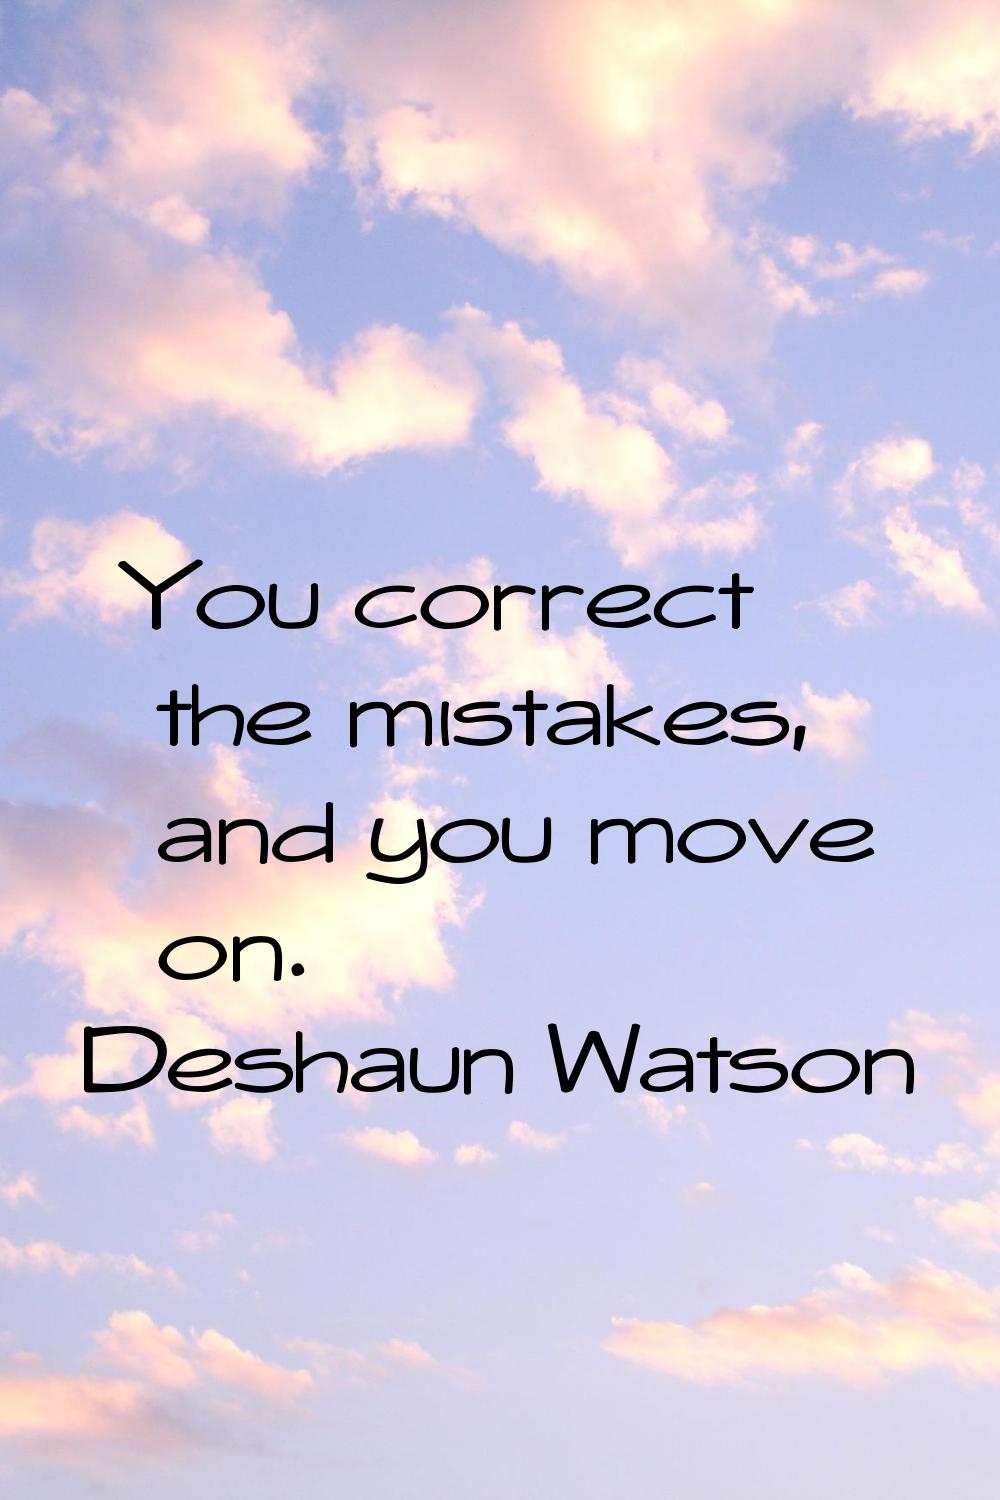 You correct the mistakes, and you move on.